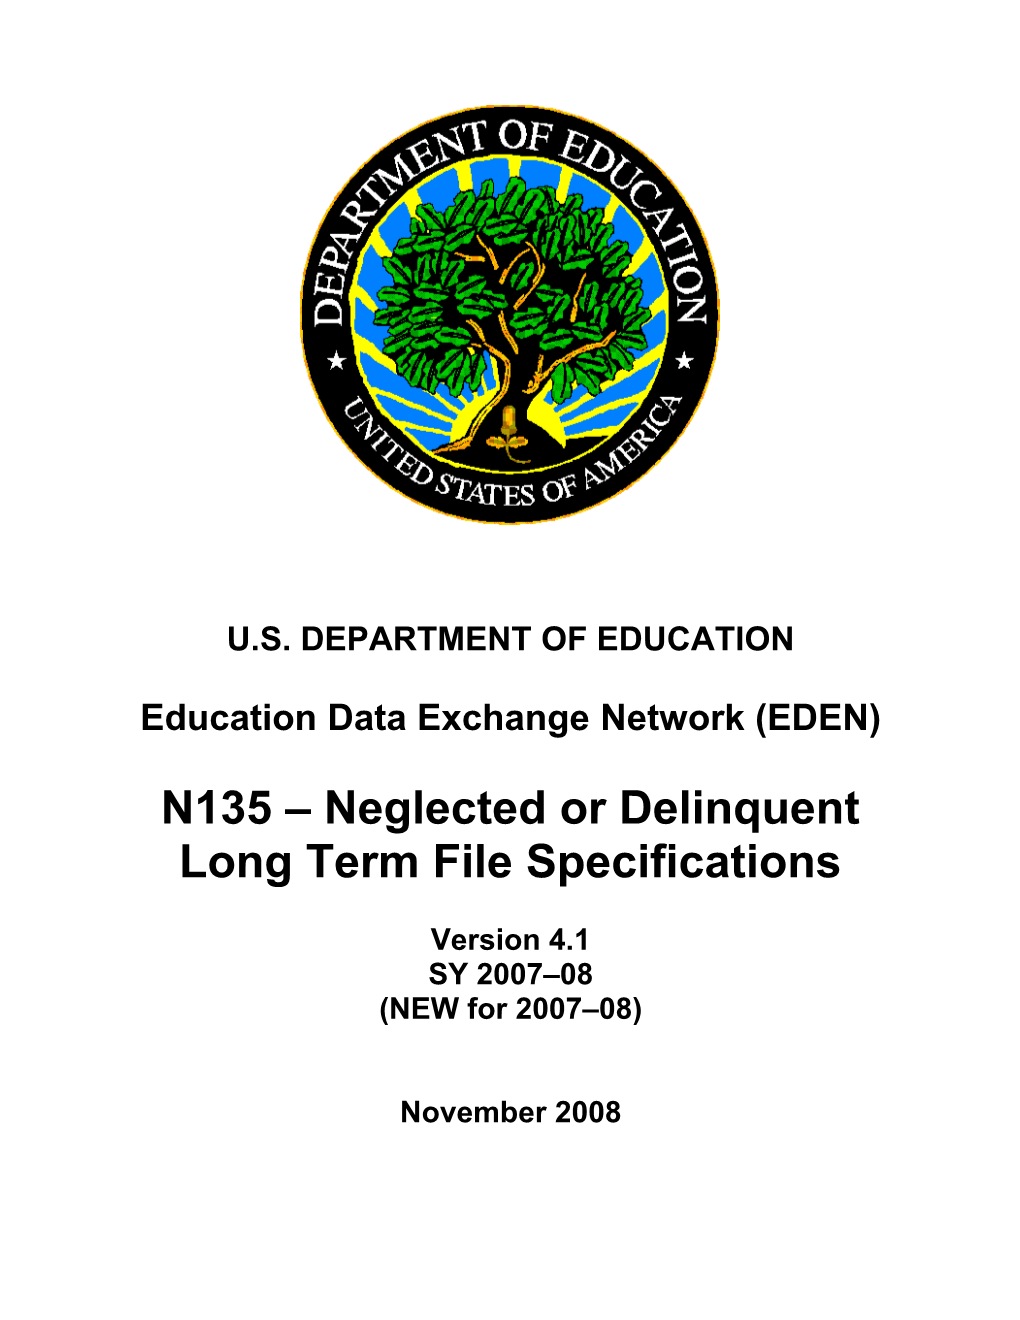 N135 Neglected Or Delinquent Long Term File Specifications (MS Word)